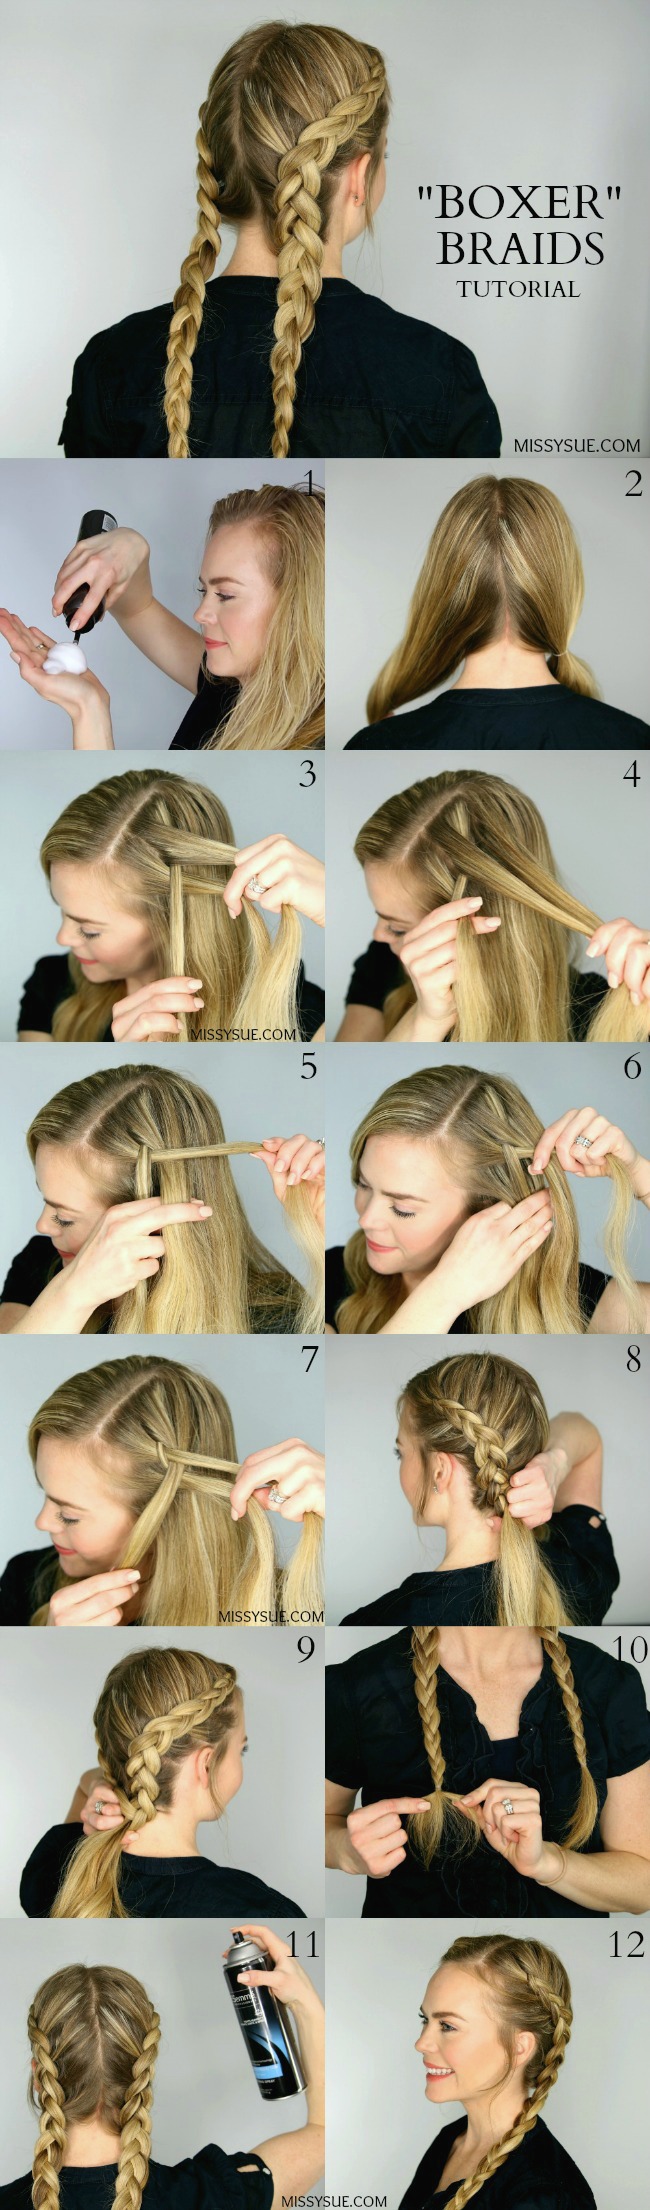 9-10-Quick-Back-To-School-Hairstyles